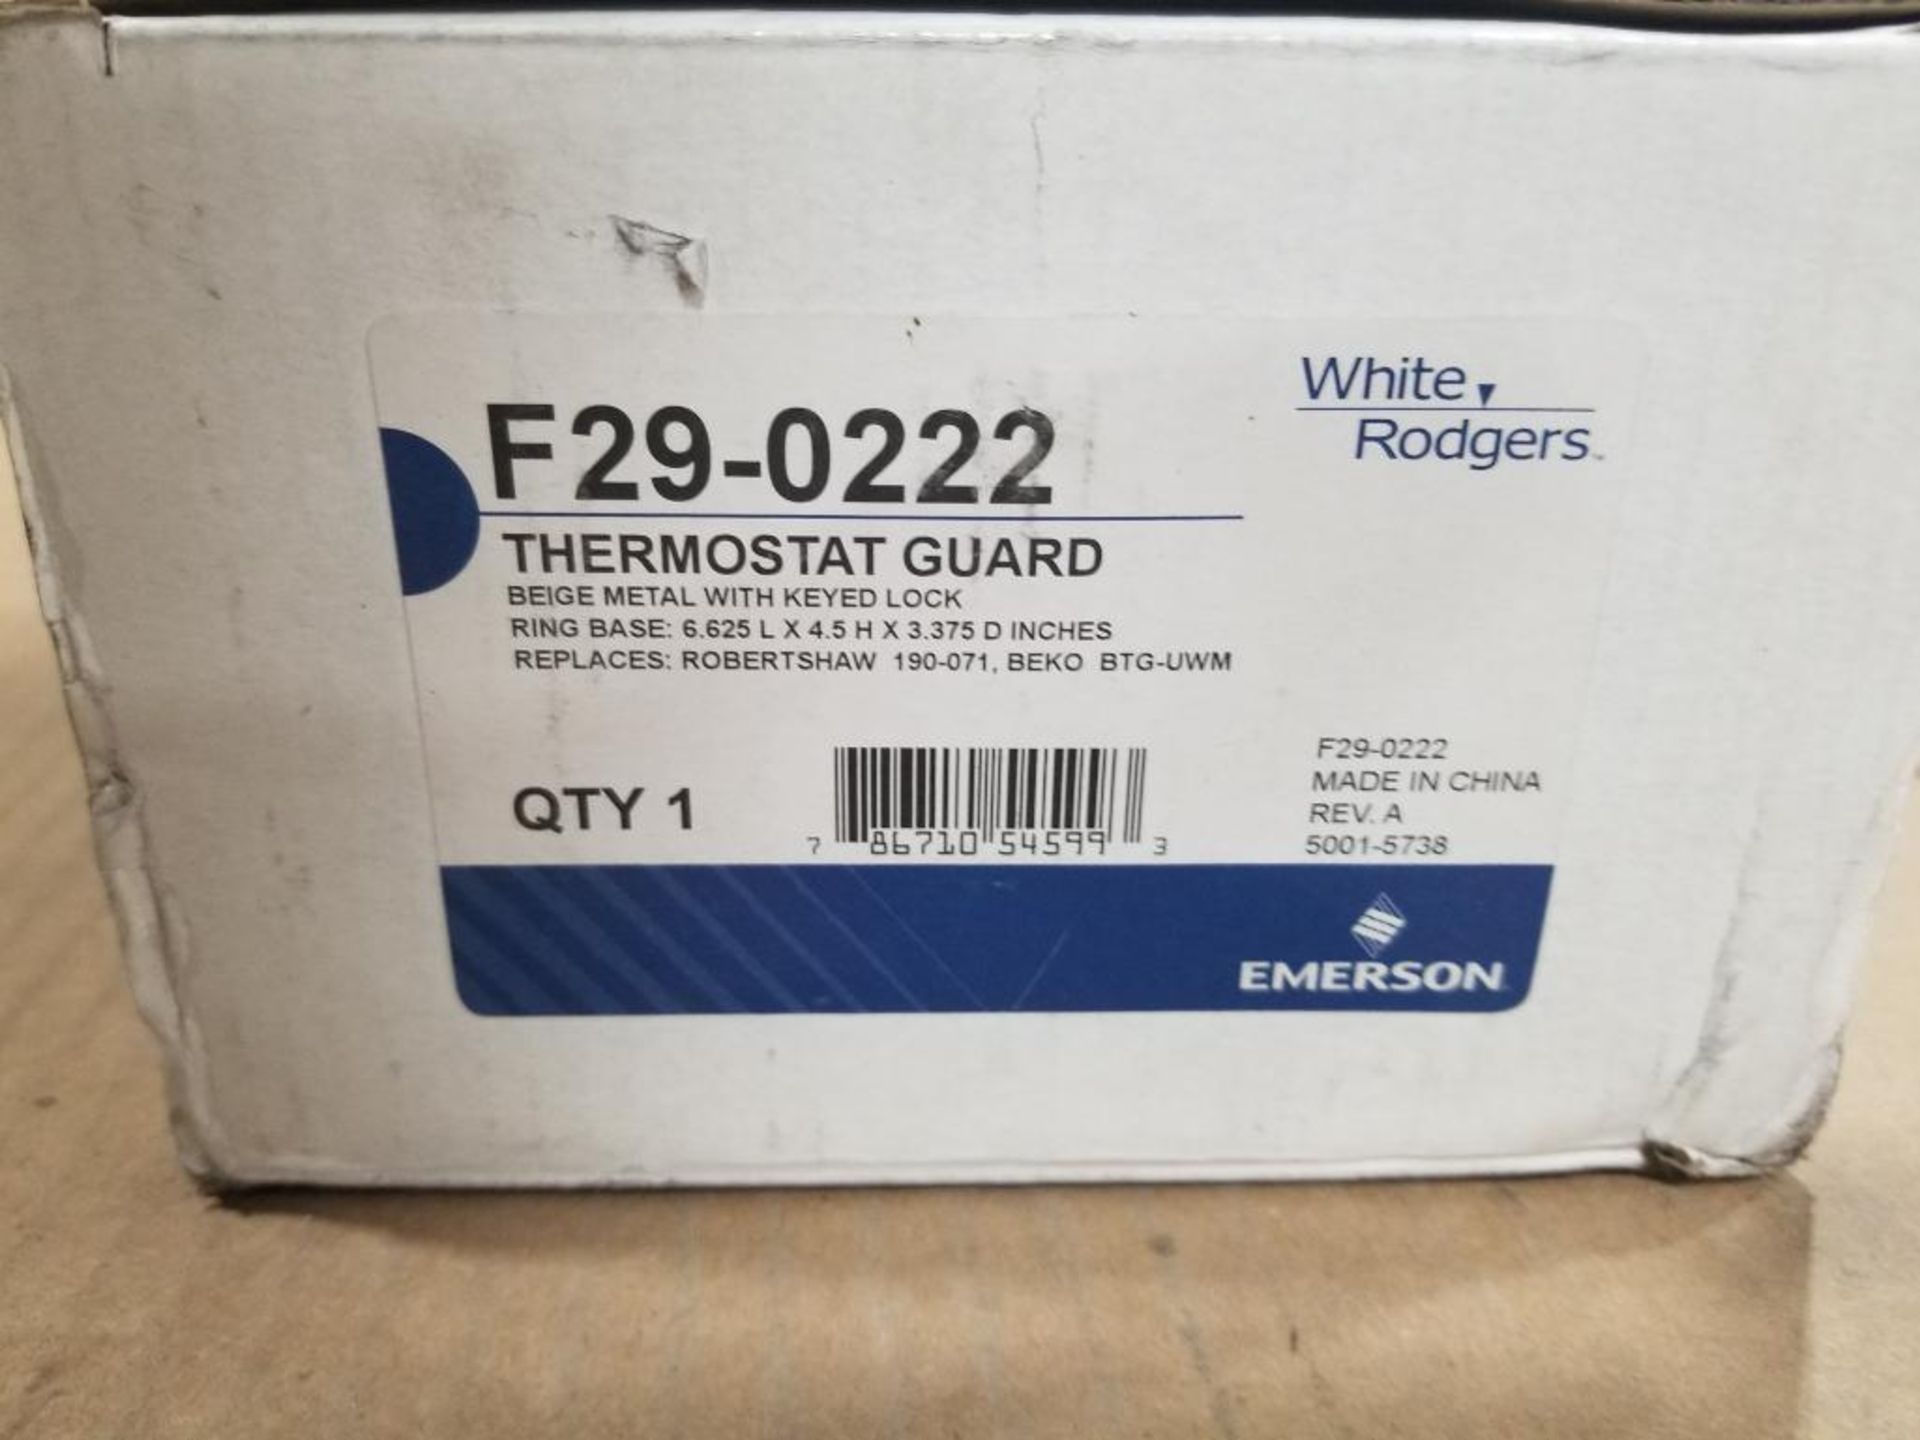 Emerson White Rodgers thermostat guard. Part number F29-0222. - Image 2 of 3